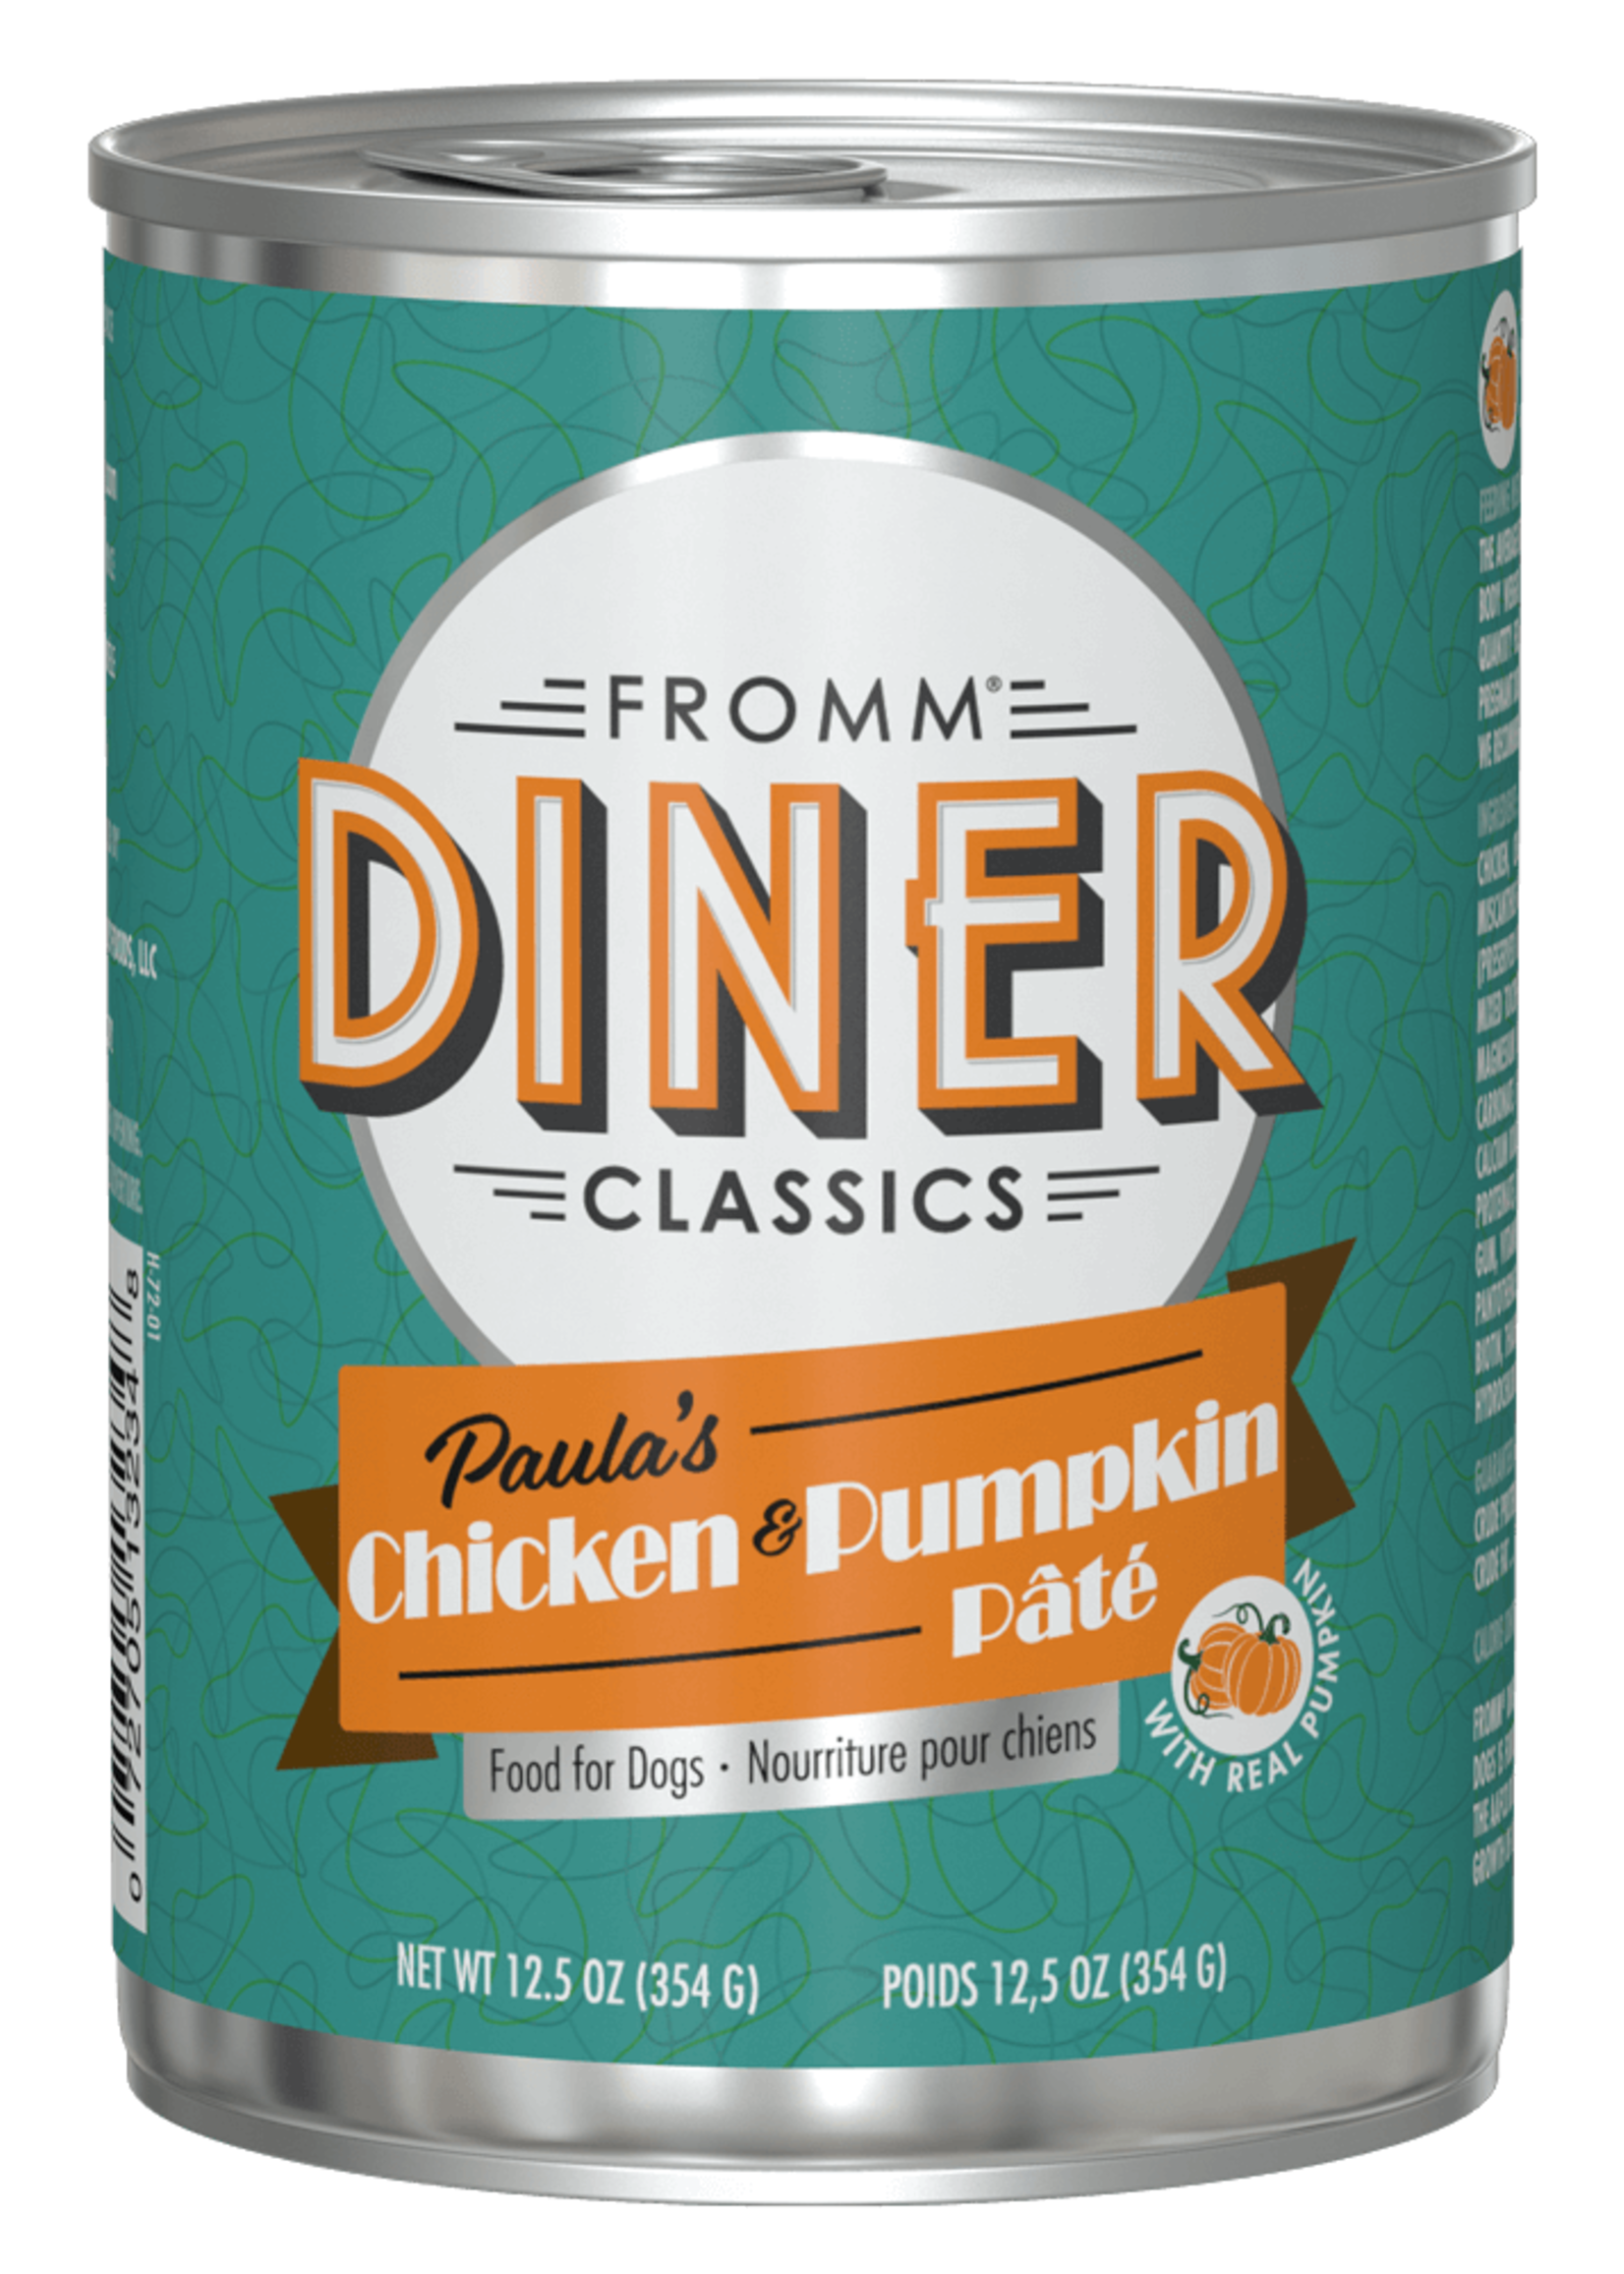 Fromm Family Pet Food Fromm Dog Diner Classics Paula's Chicken & Pumpkin Pate 12.5 oz single